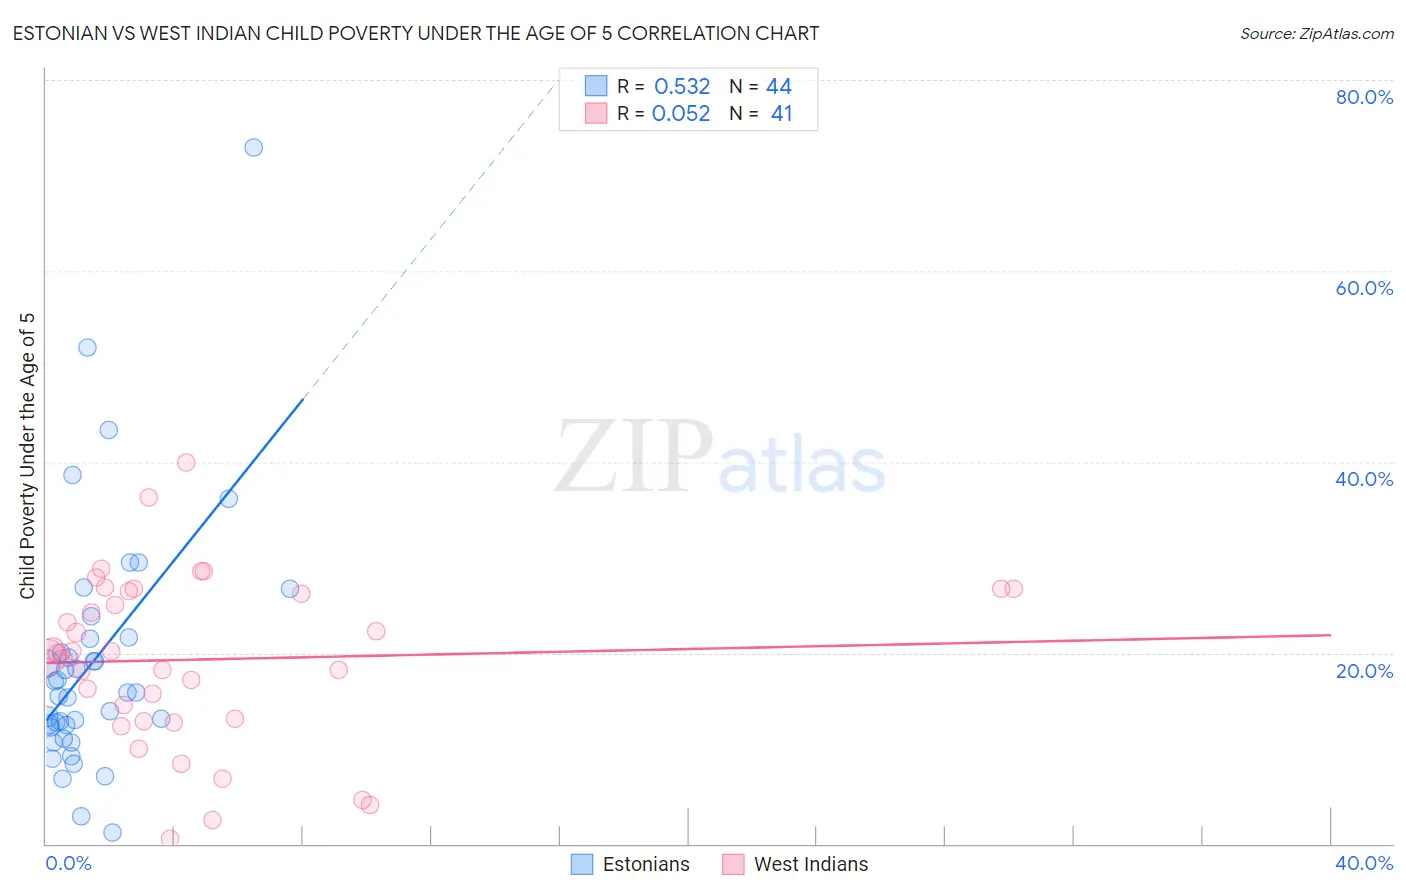 Estonian vs West Indian Child Poverty Under the Age of 5